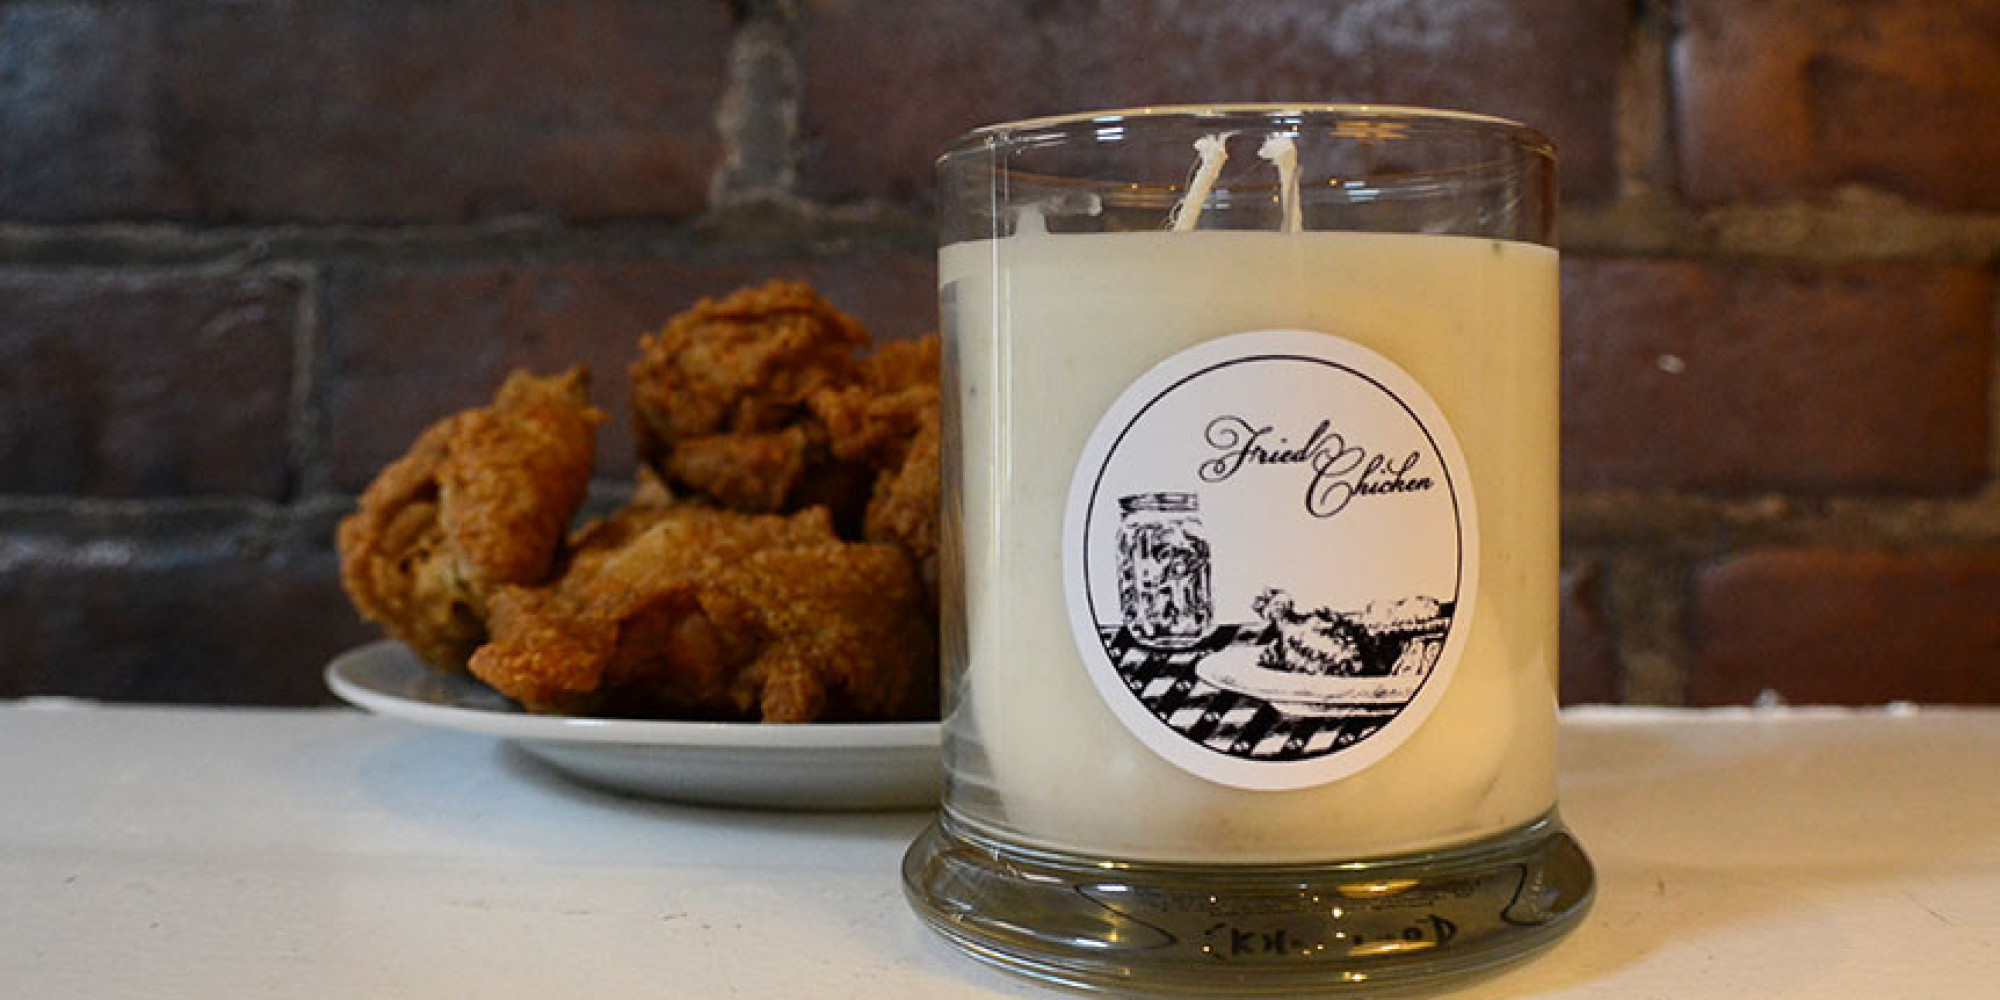 Kentucky Fried ChickenScented Candles. For the Holidays? Racked